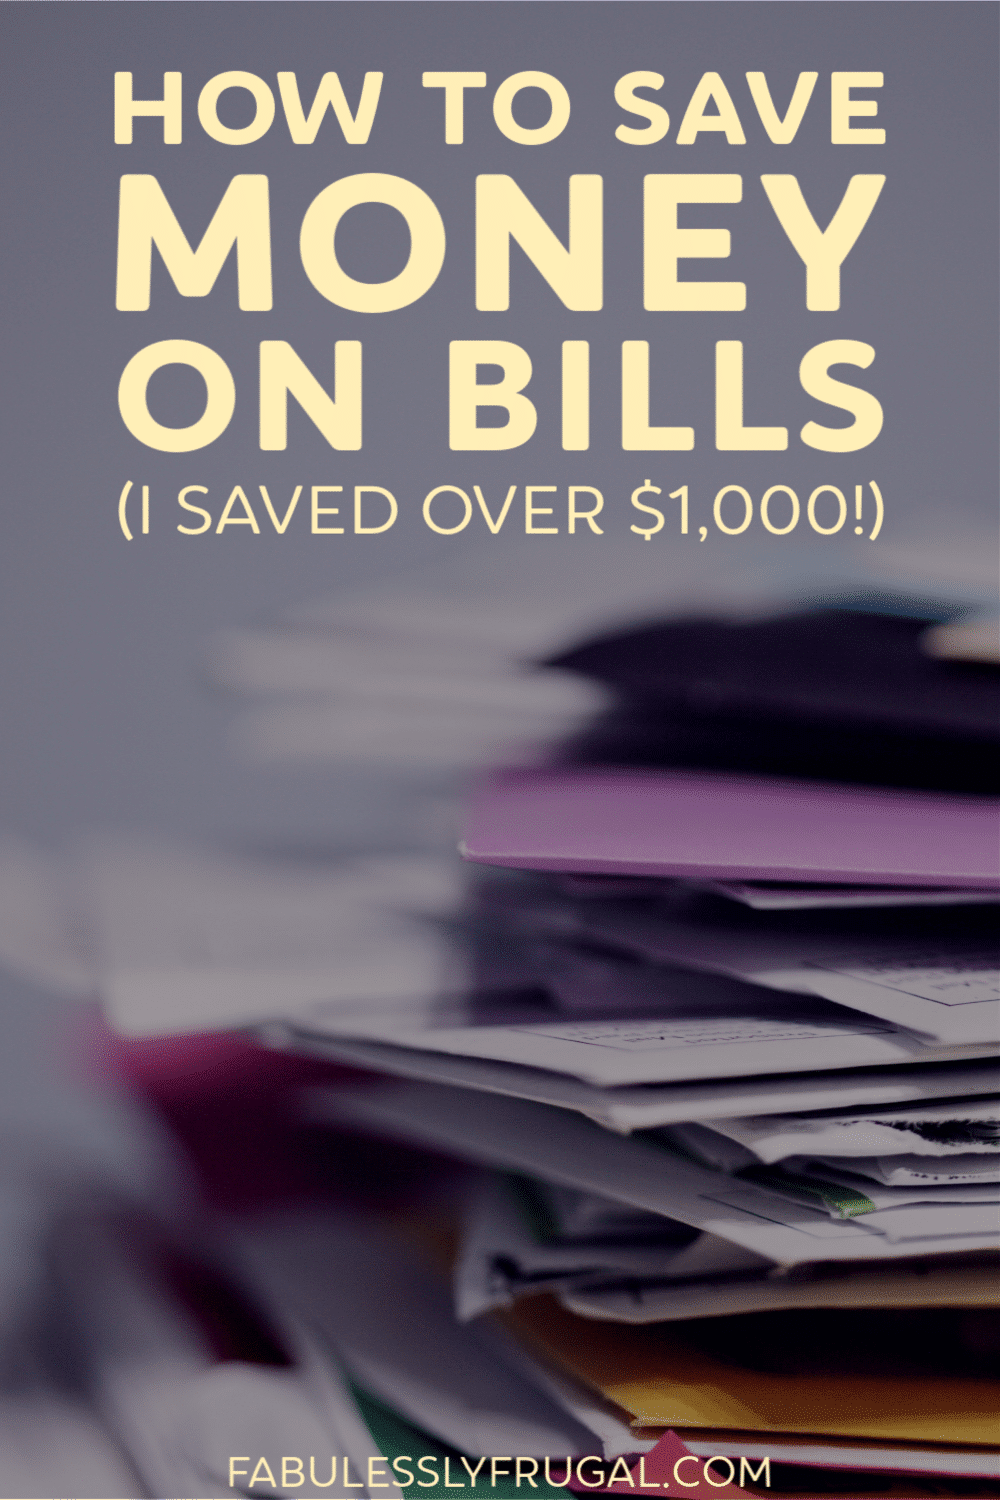 How to save money on bills